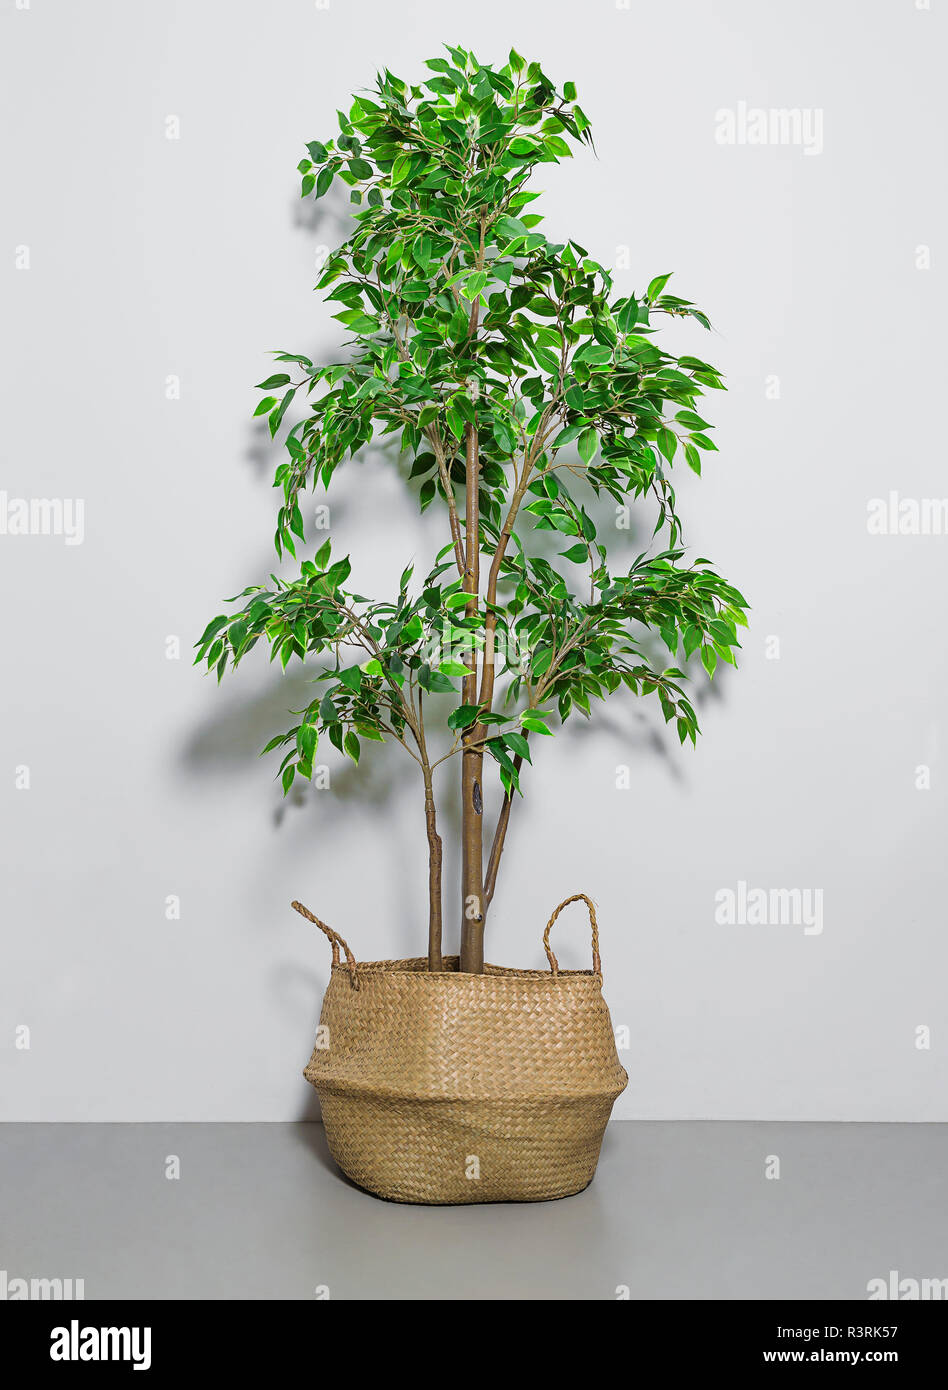 Shot of a Fake house plant in basket Stock Photo